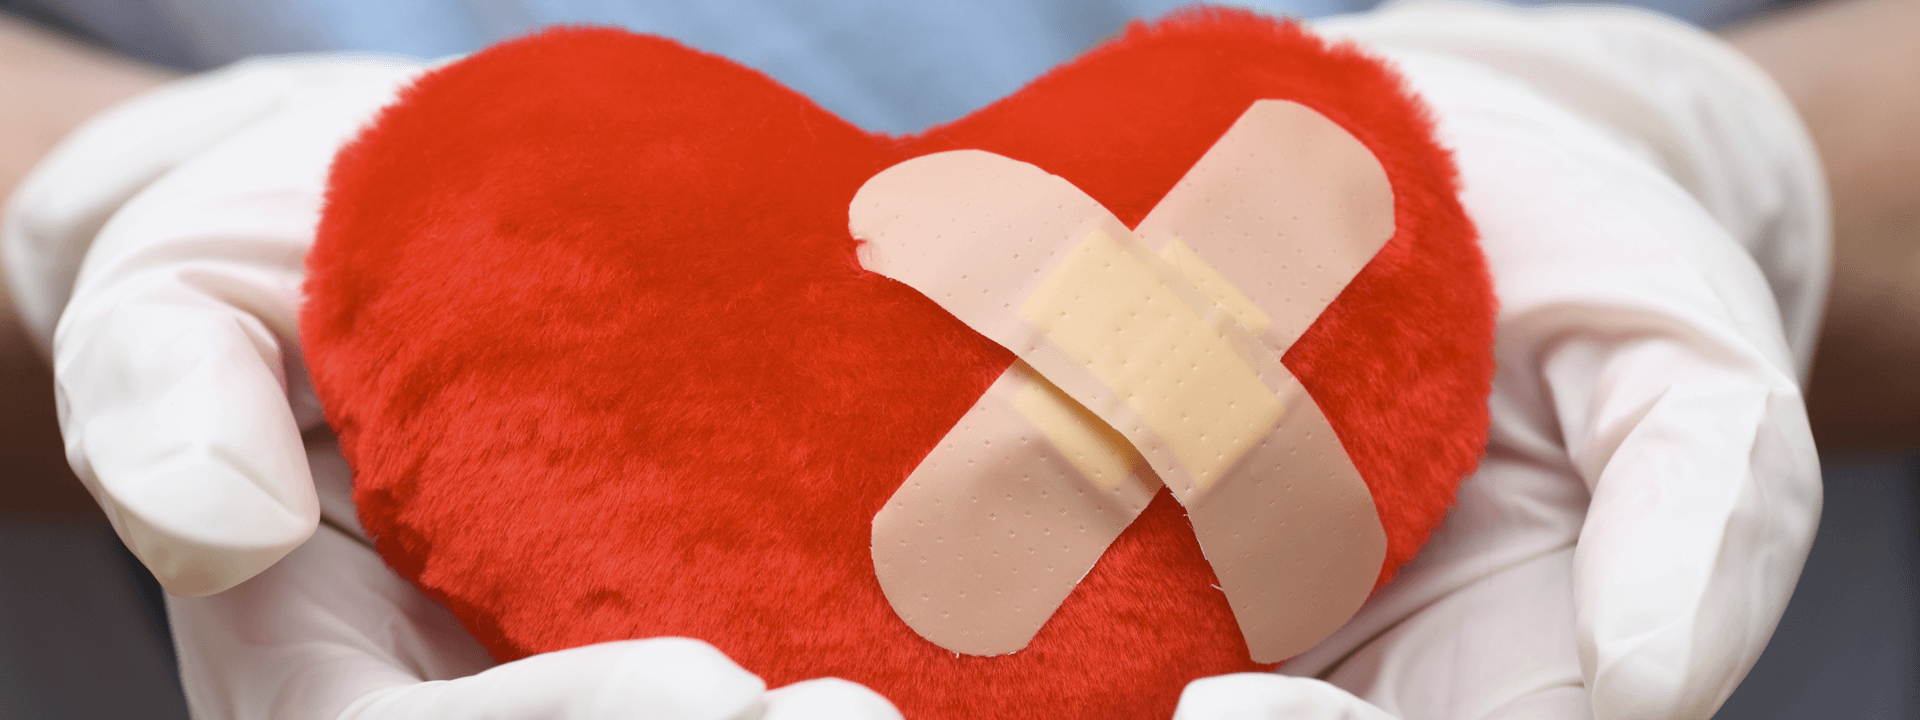 A Band-Aid After A Heart Attack?